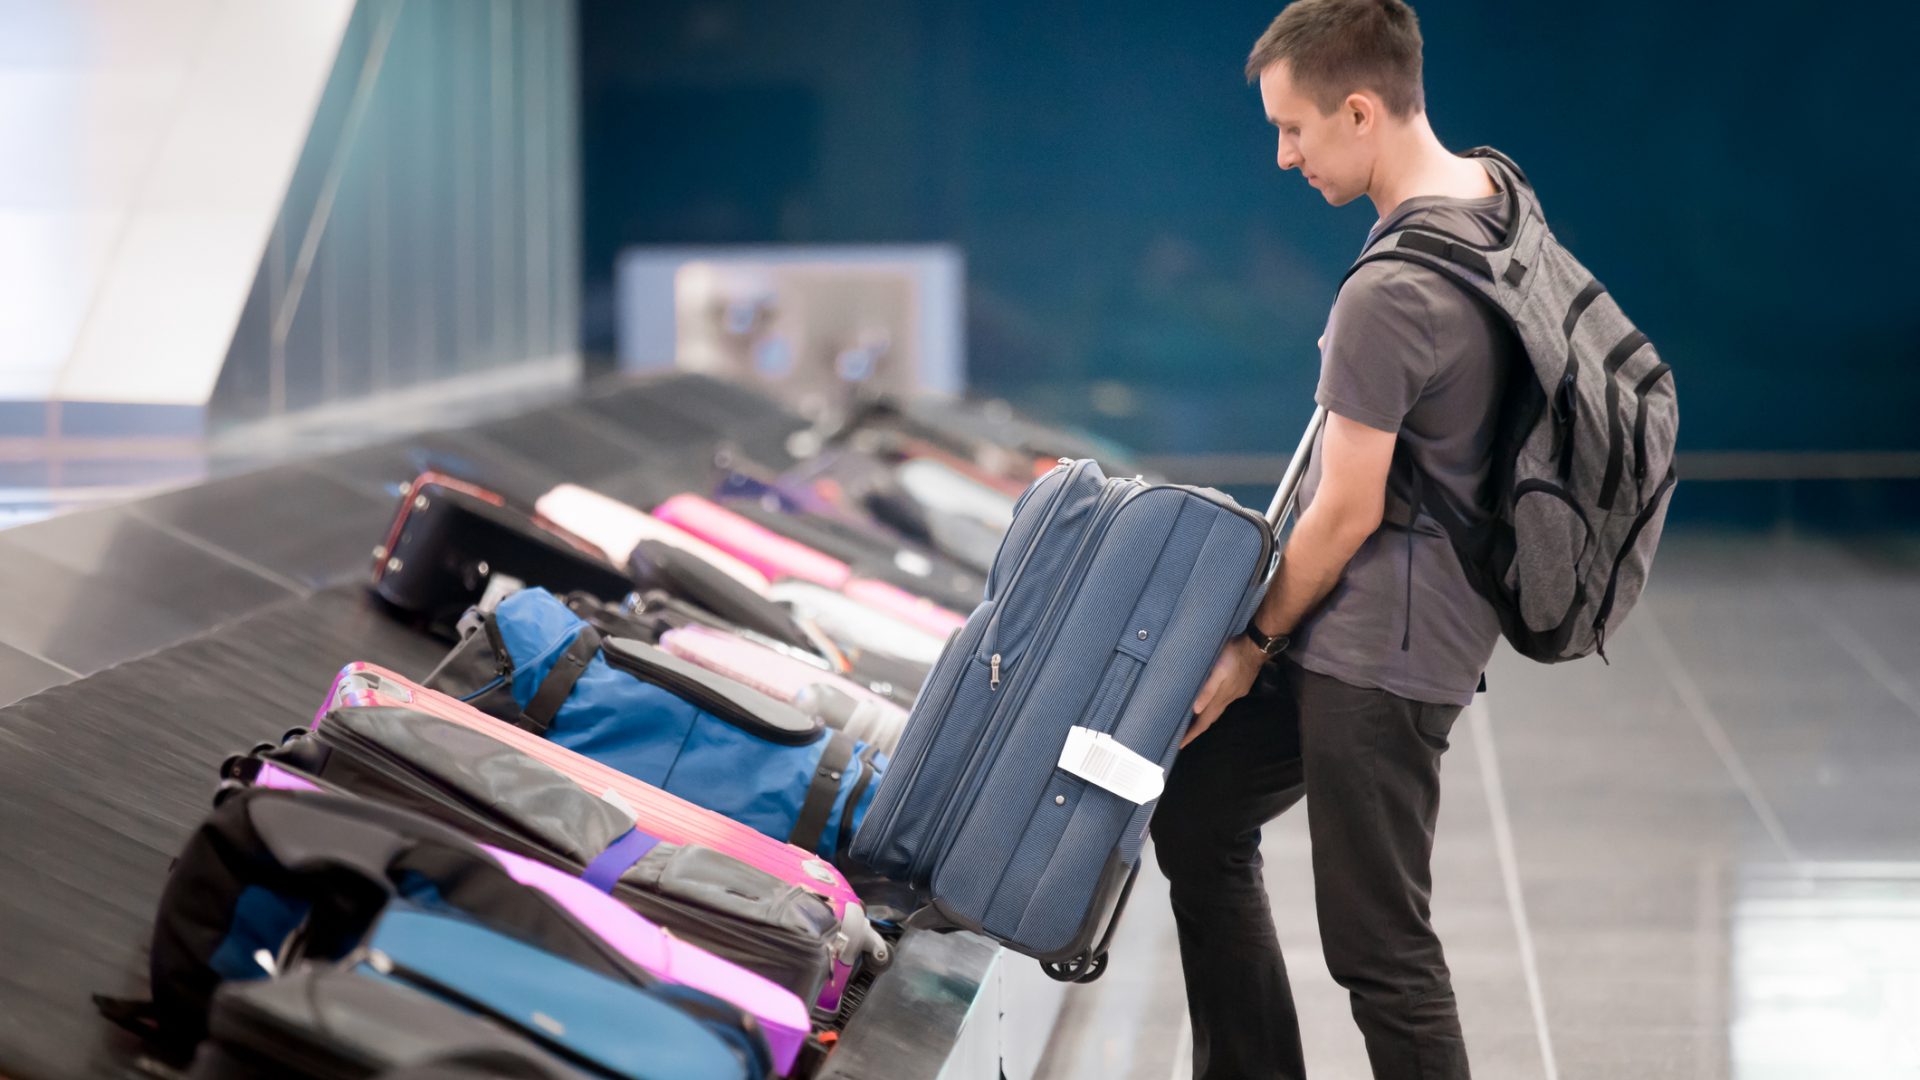 Delta Baggage Policy: Carry-On Size Rules & Weight